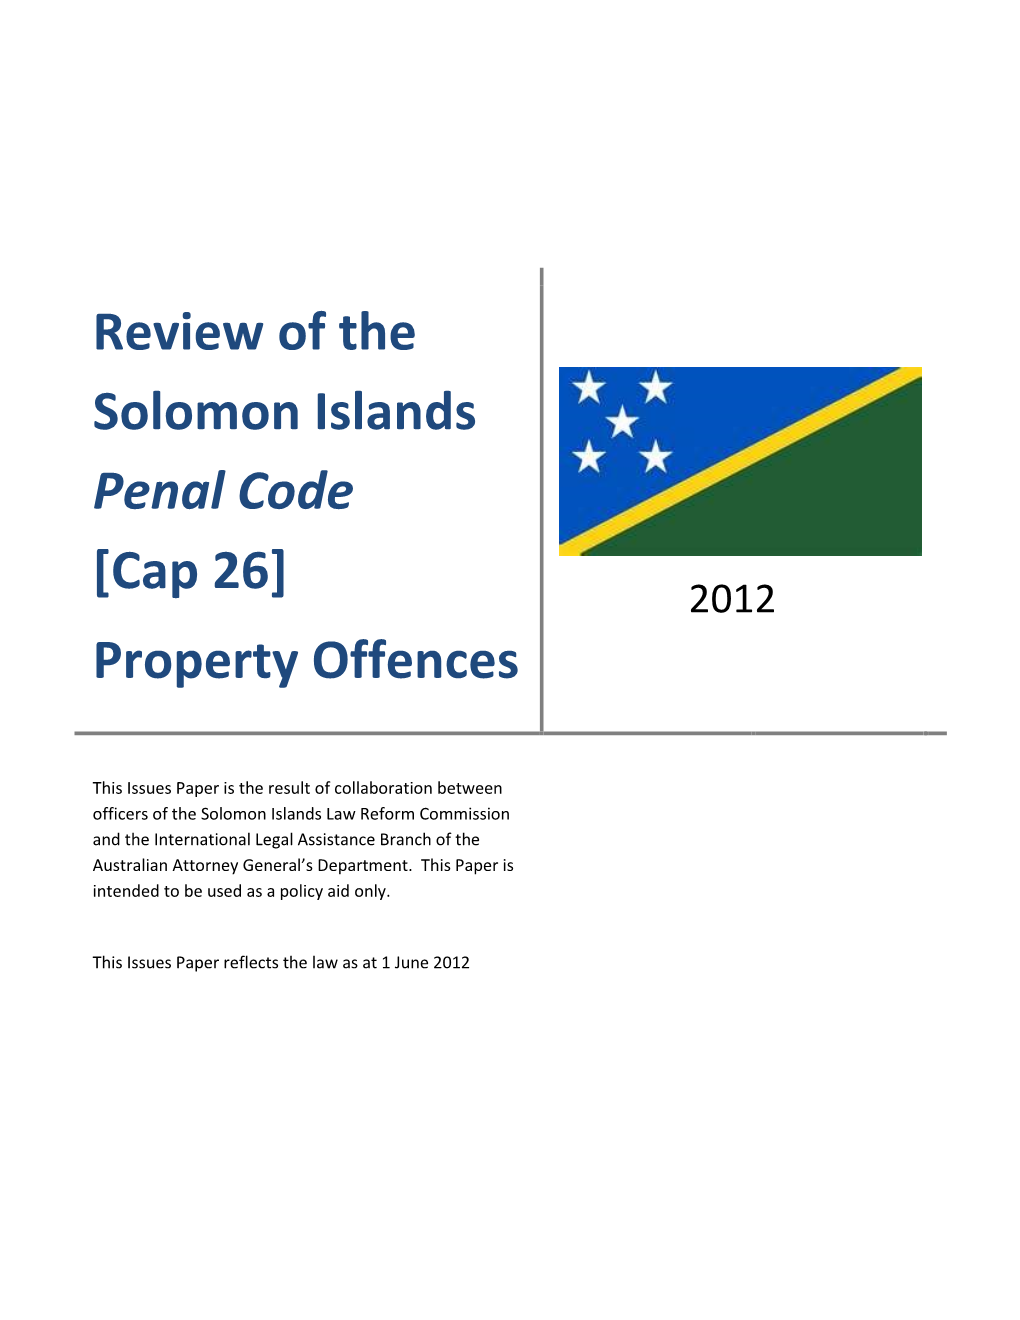 Property Offences